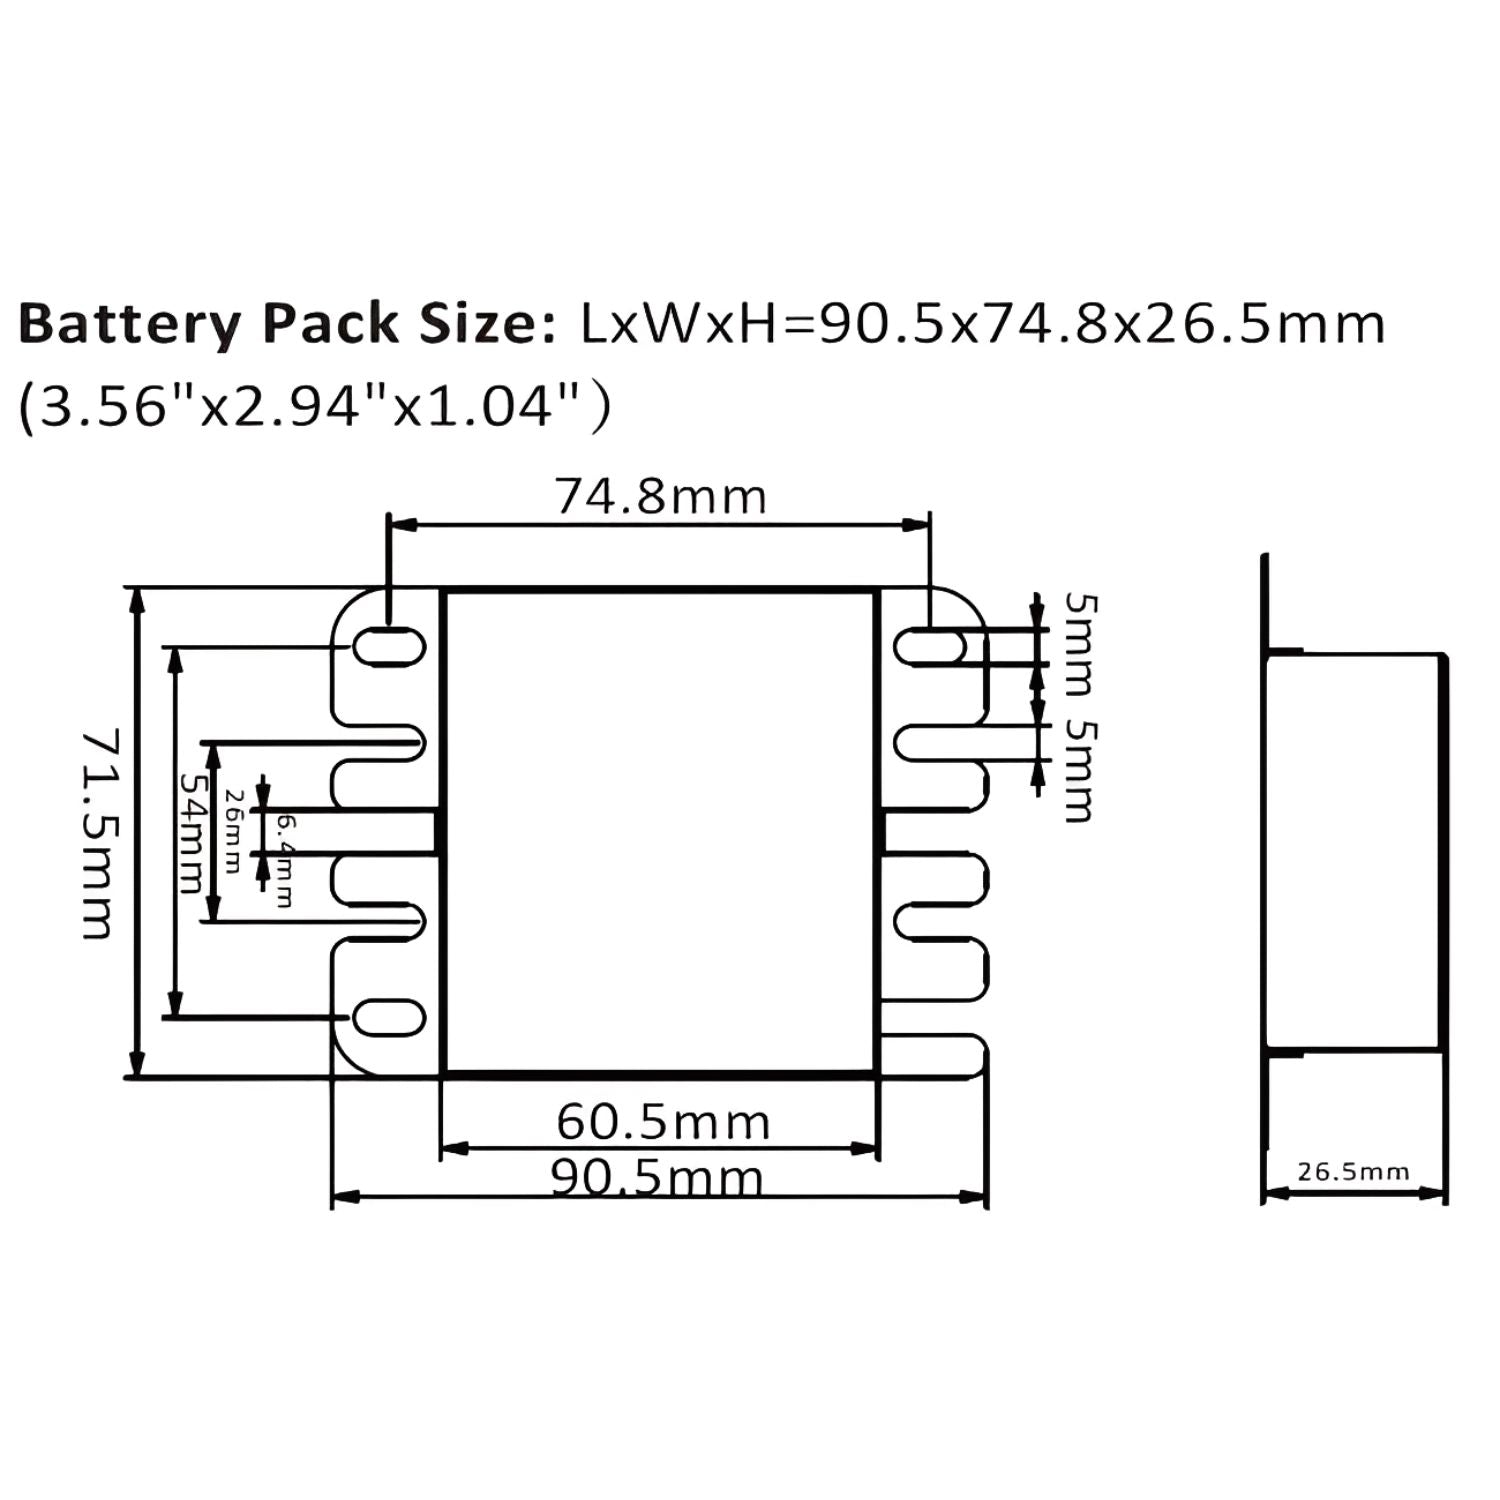 Dimension of Emergency Battery for wall pack light fixtures or wall lights outdoor